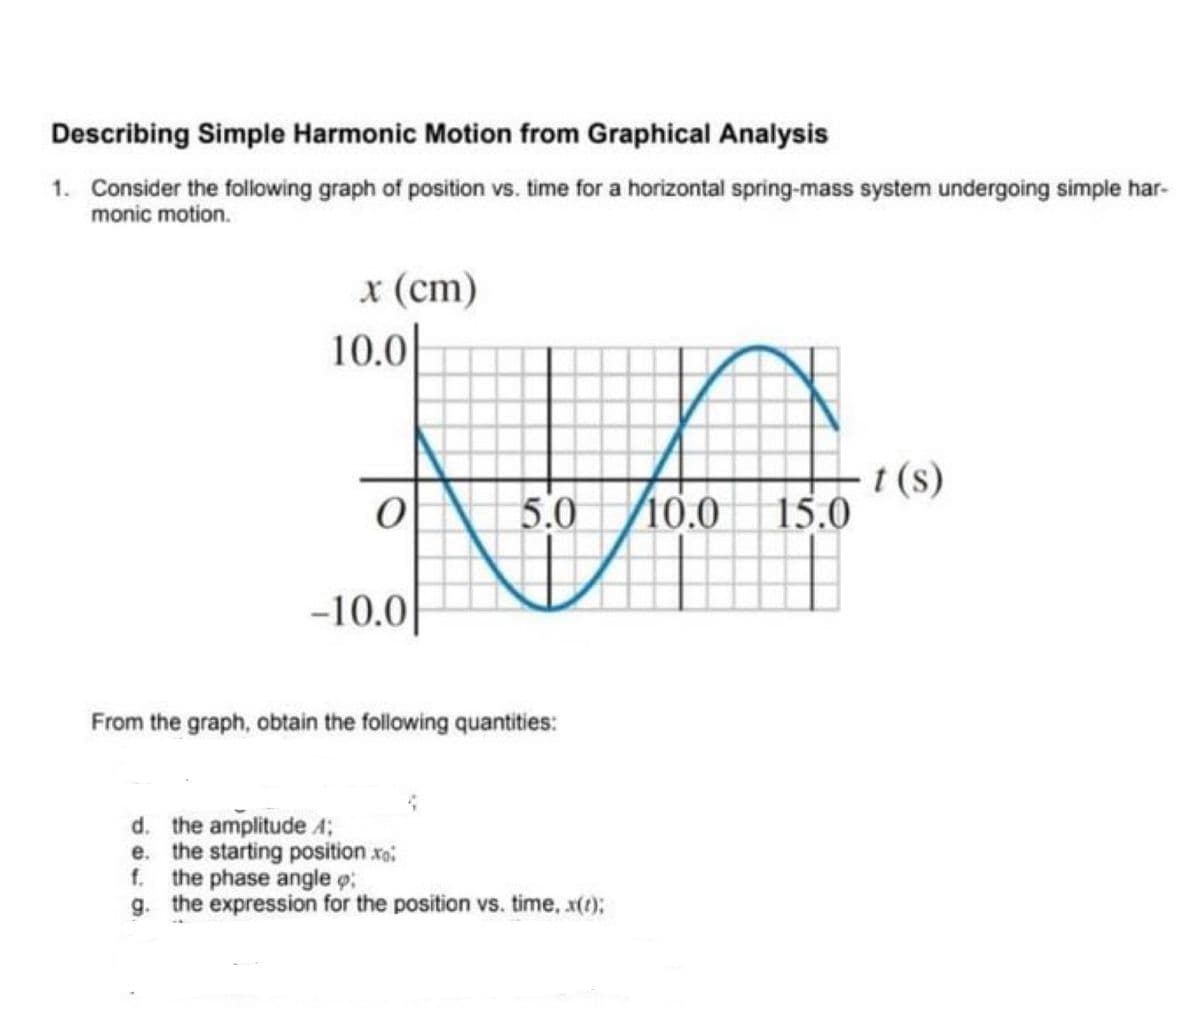 Describing Simple Harmonic Motion from Graphical Analysis
1. Consider the following graph of position vs. time for a horizontal spring-mass system undergoing simple har-
monic motion.
x (cm)
10.0
-10.0
5.0
From the graph, obtain the following quantities:
d. the amplitude A;
e. the starting position.xo:
f. the phase angle :
g. the expression for the position vs. time, x();
10.0 15.0
t(s)